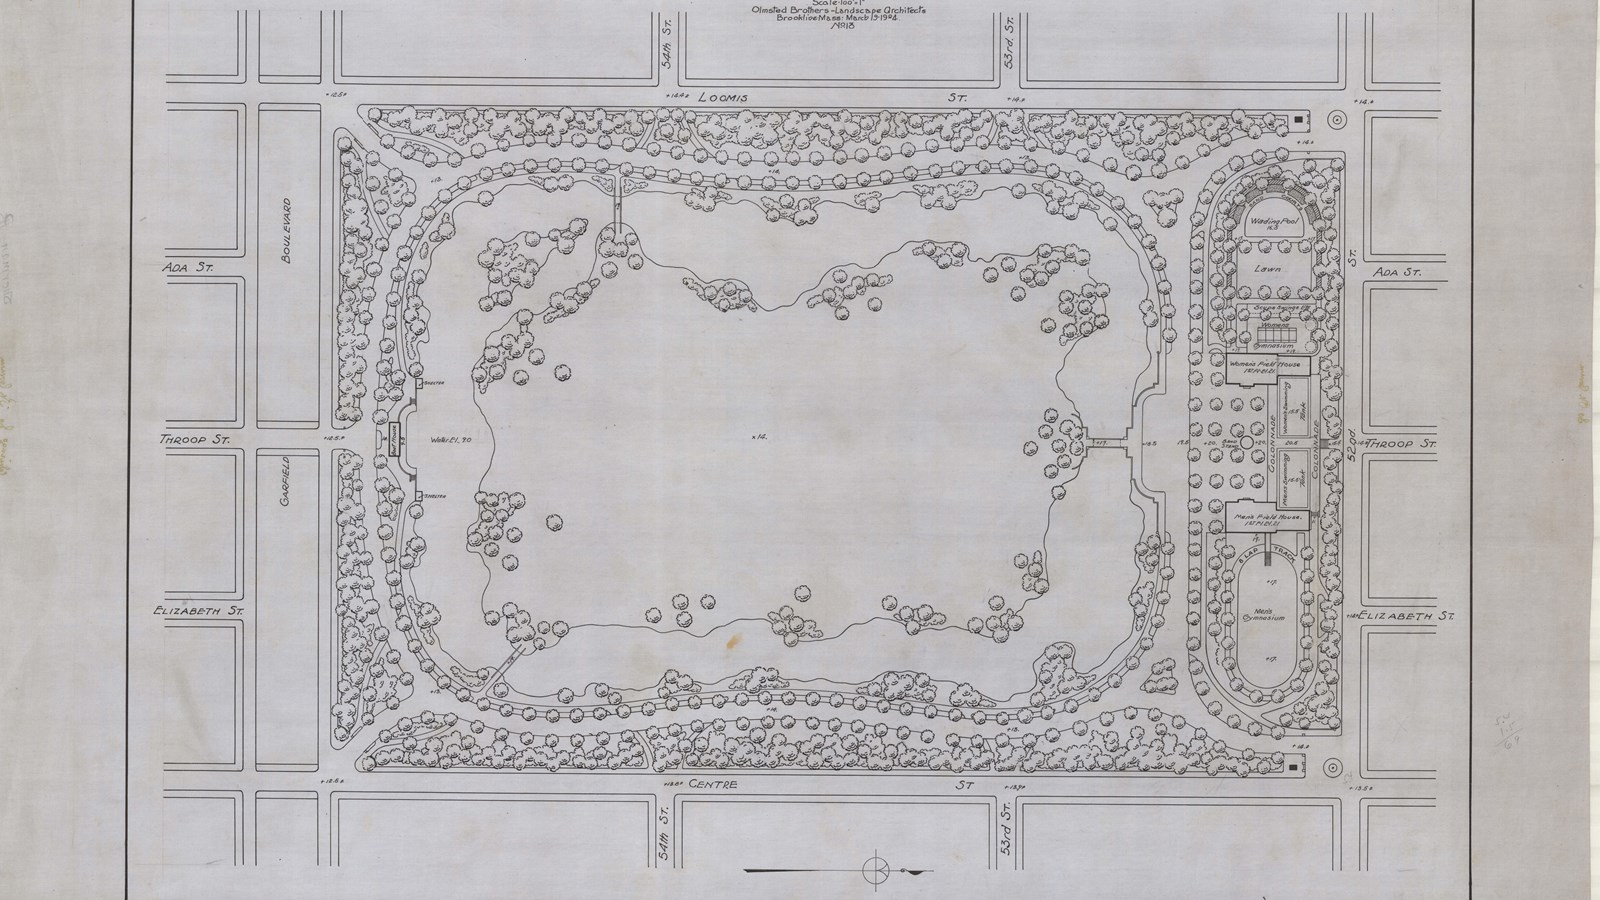 Plan of rectangular park with curving tree lined path around it and large open circle in middle